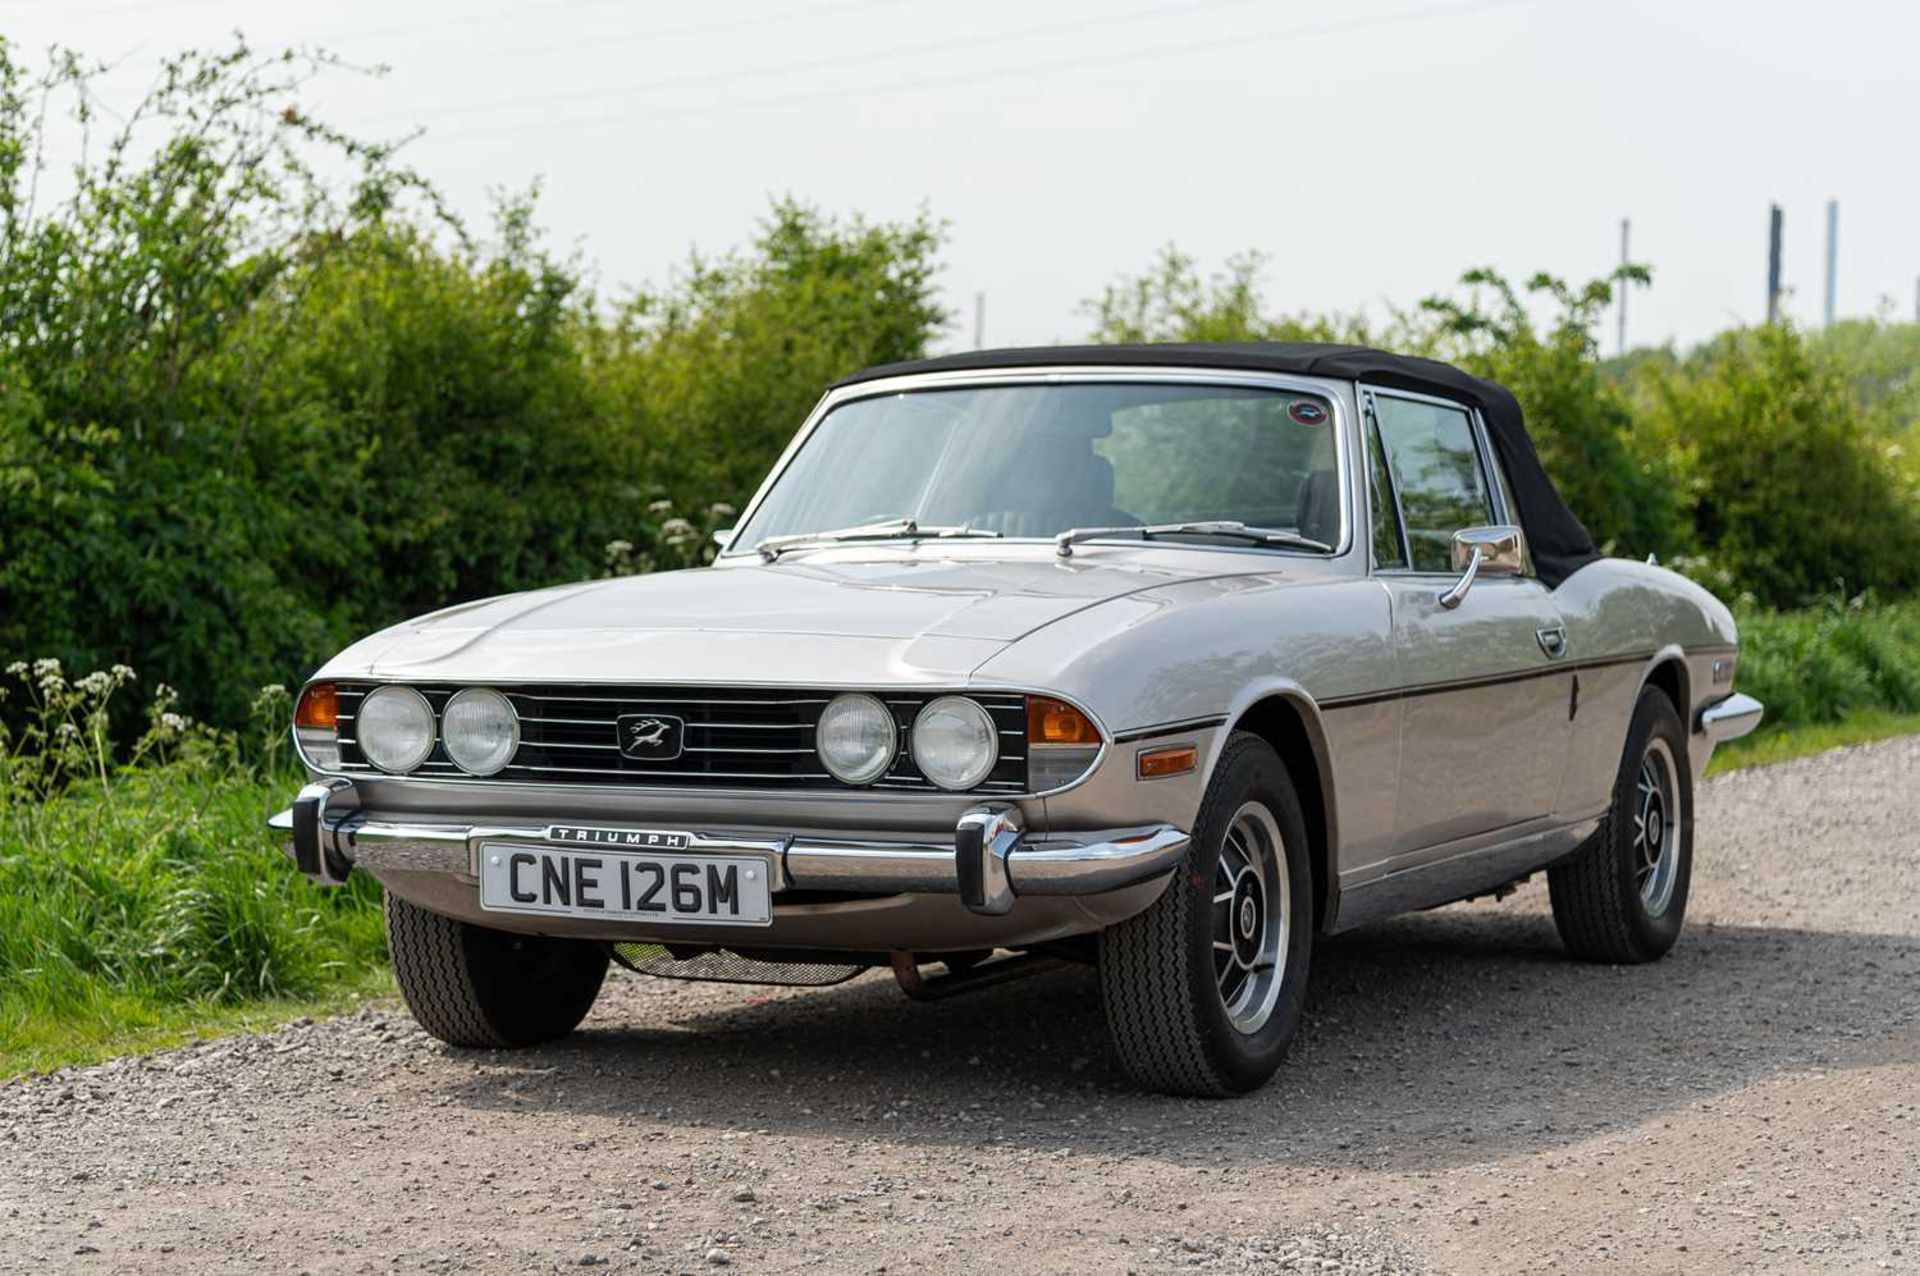 1974 Triumph Stag ***NO RESERVE*** Fully-restored example, equipped with manual overdrive transmissi - Image 12 of 83